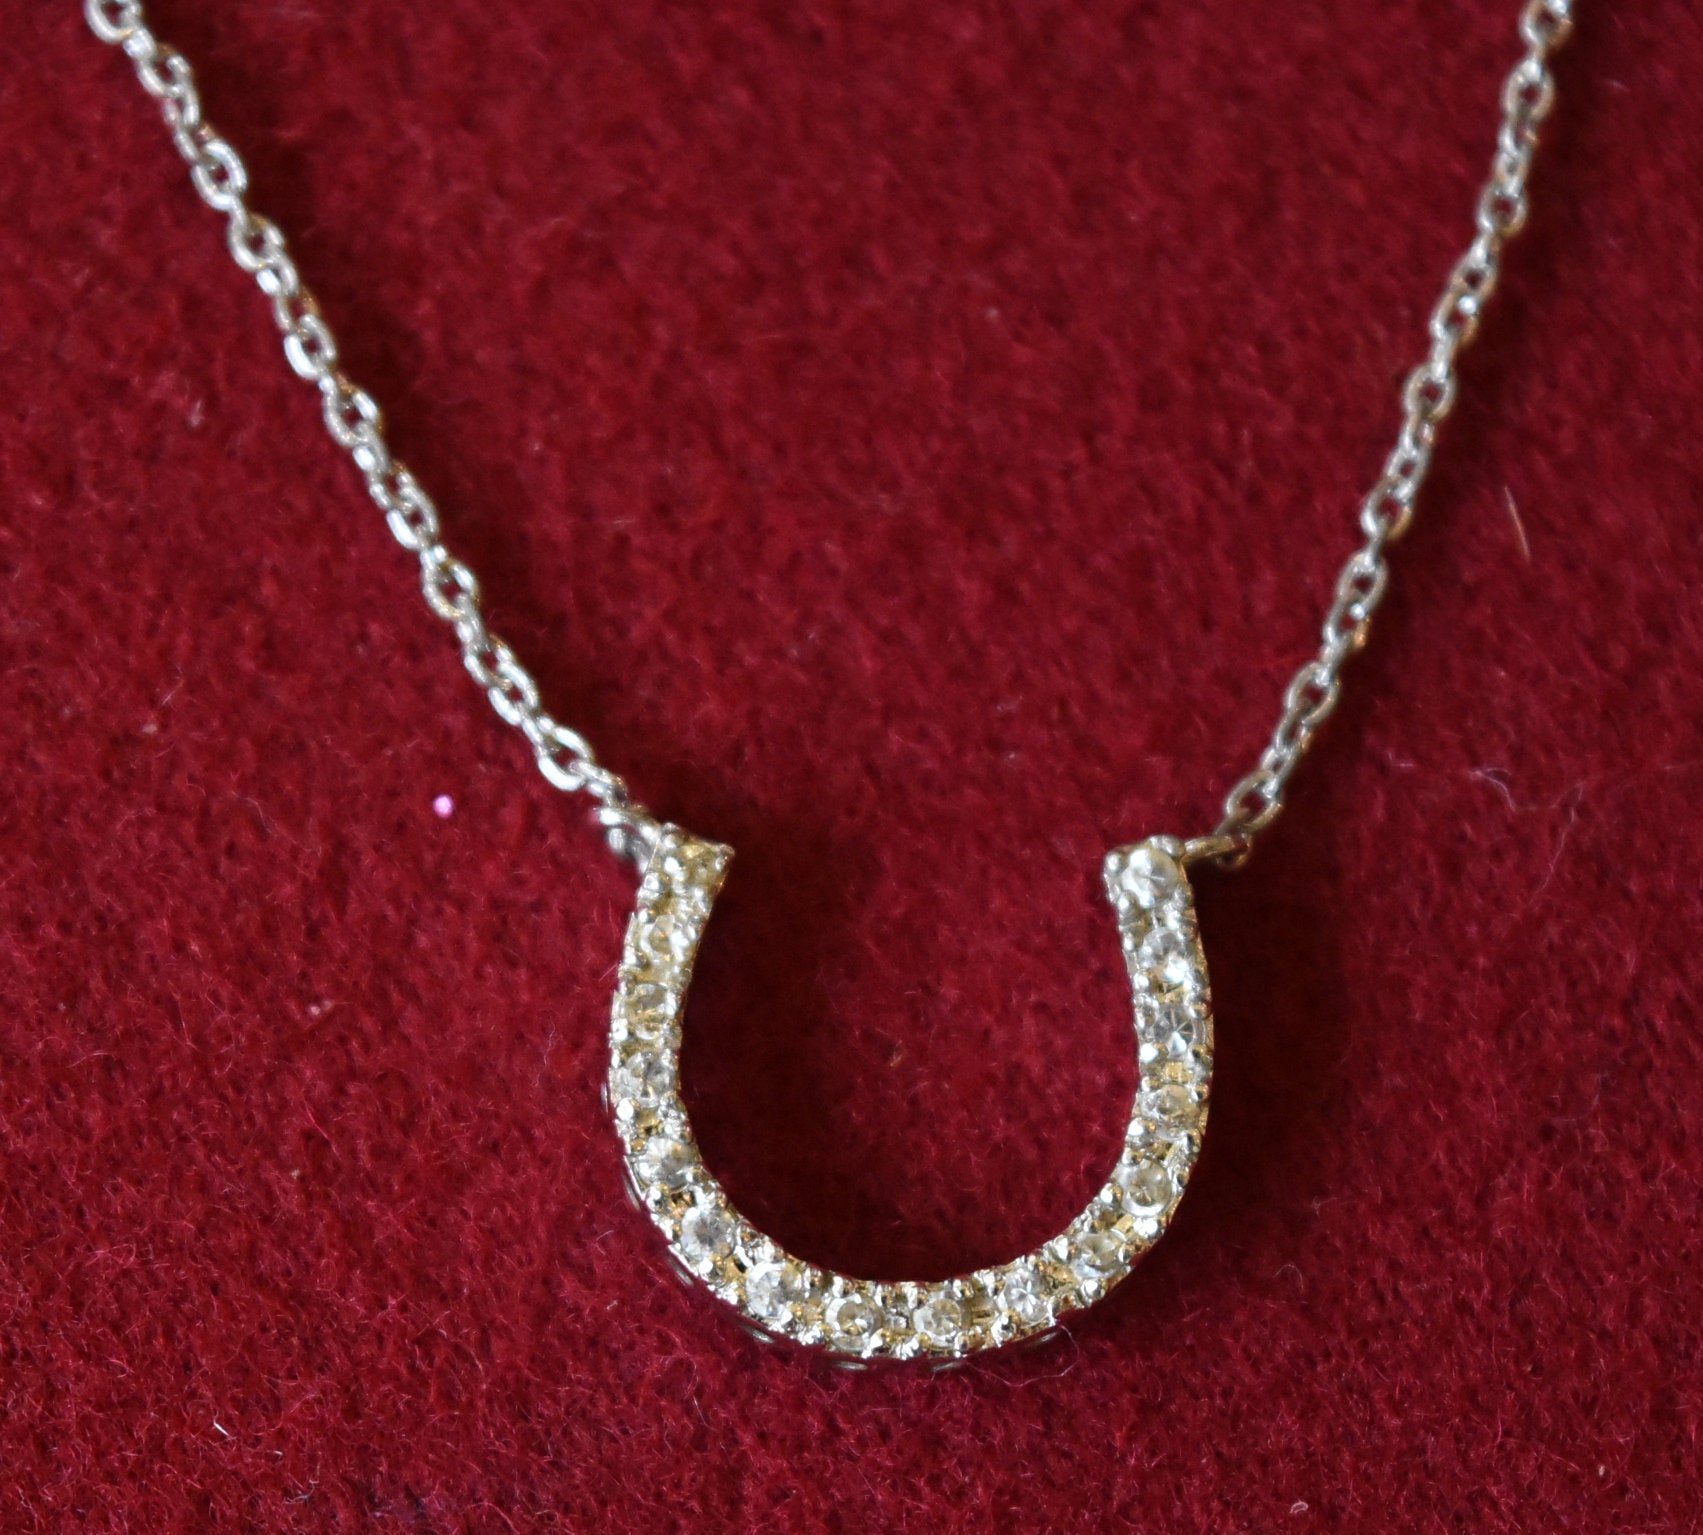 Sterling Silver Chain with Horseshoe Pendant - 17"